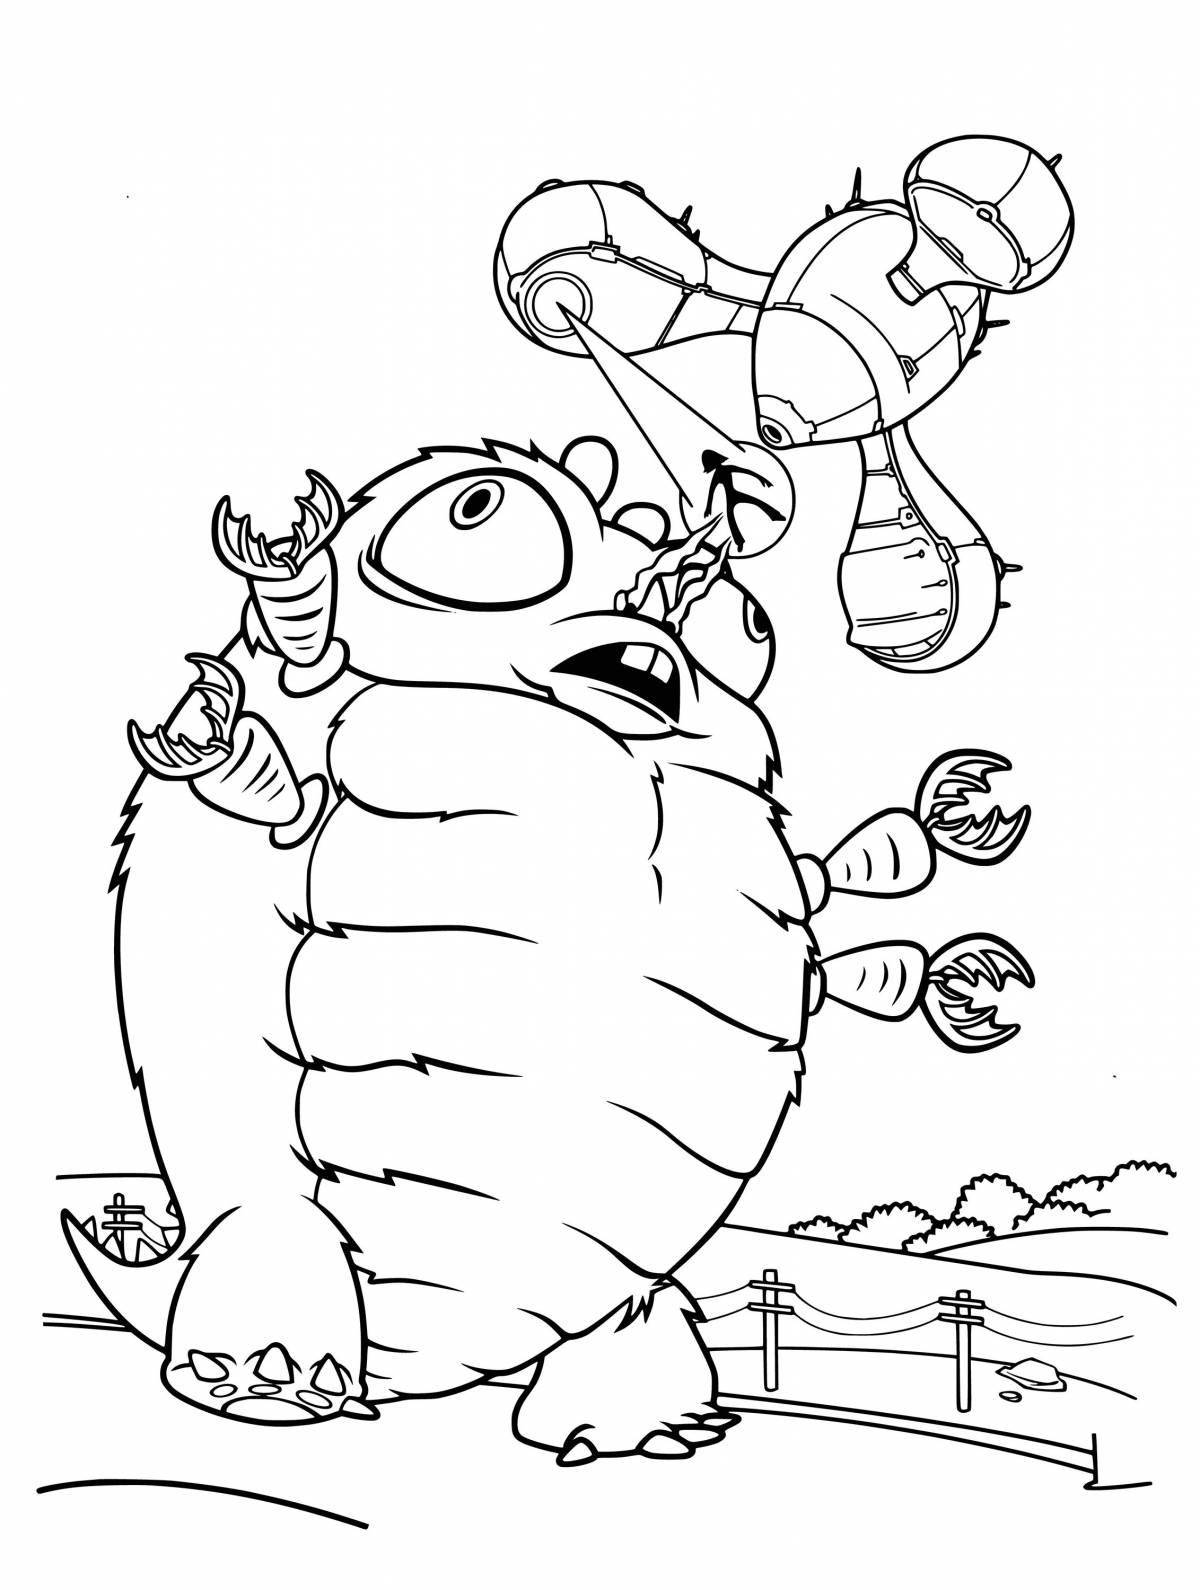 Colorful monsters vs aliens coloring book